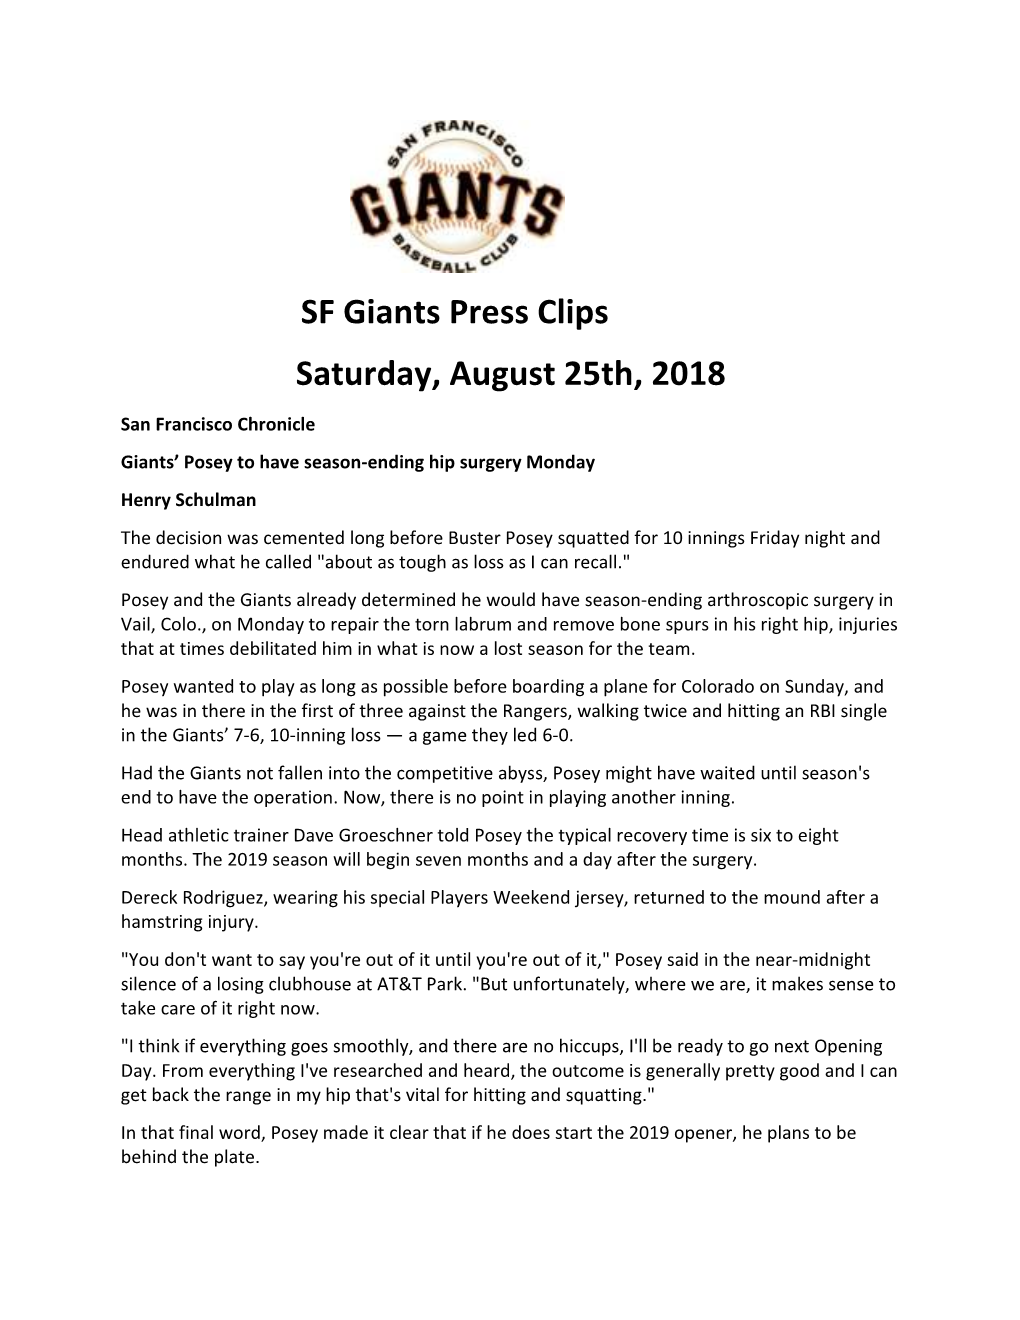 SF Giants Press Clips Saturday, August 25Th, 2018